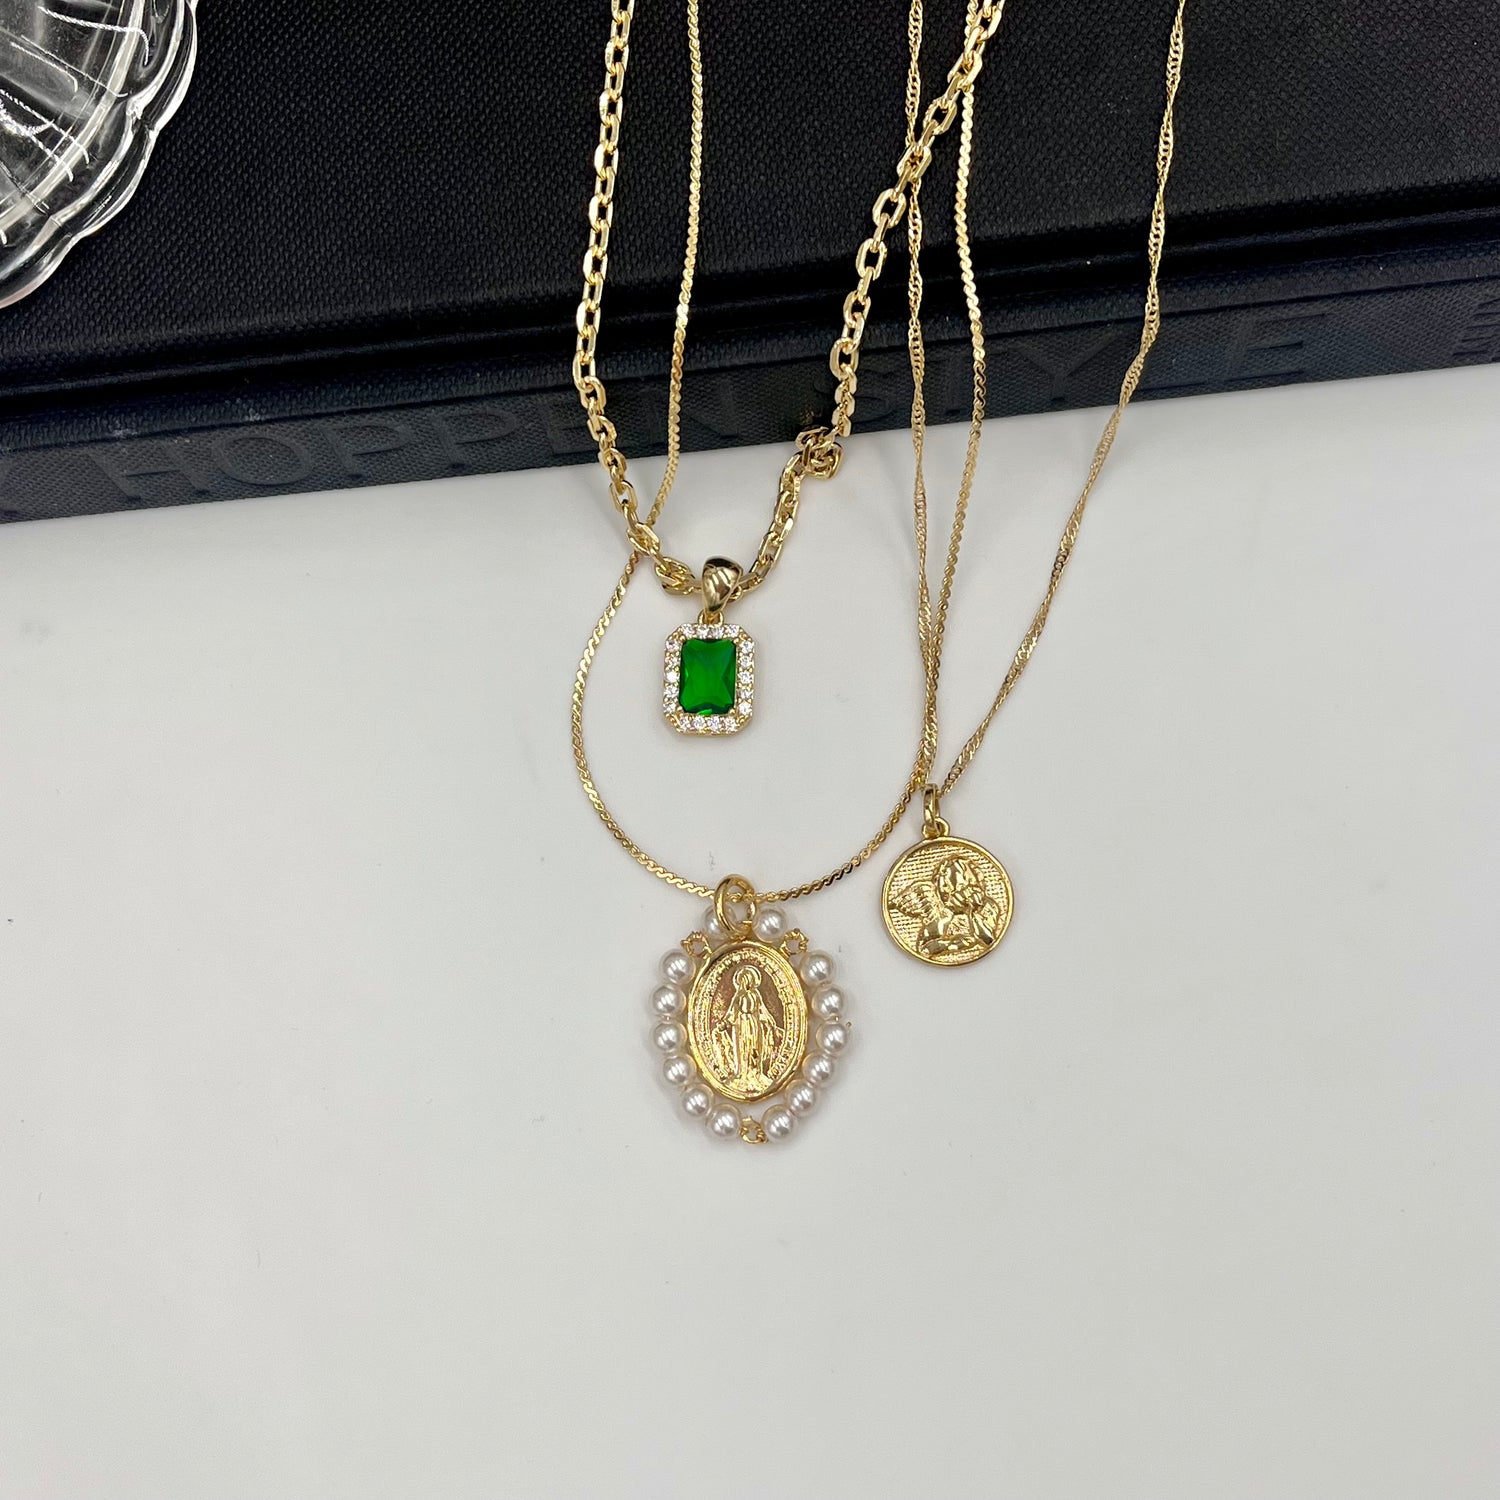 3 necklaces laid out on a white background. Emerald pendant on a gold chain. Saint Mary with pearls surrounding it on a gold chain. Baby angel pendant on a gold chain